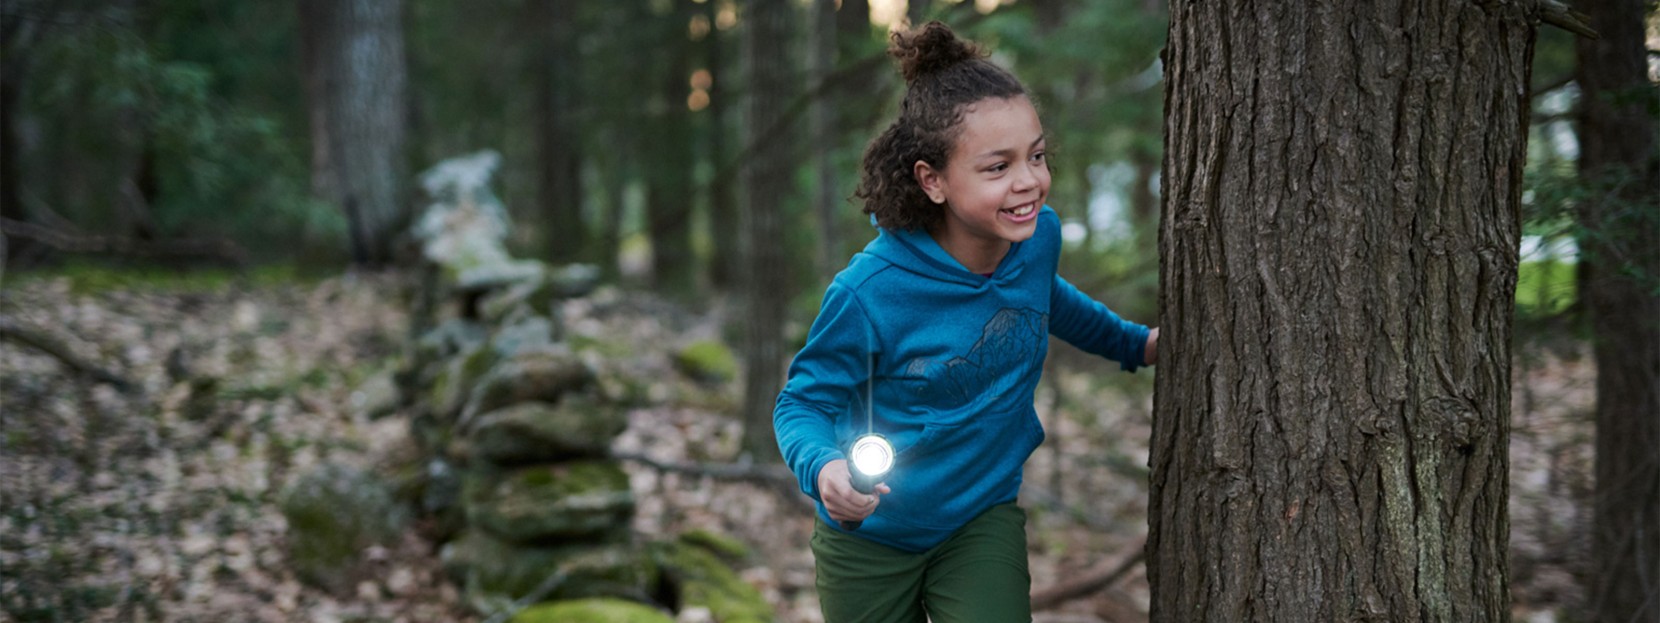 A young girl peaks around a tree with a flashlight playing flashlight tag.